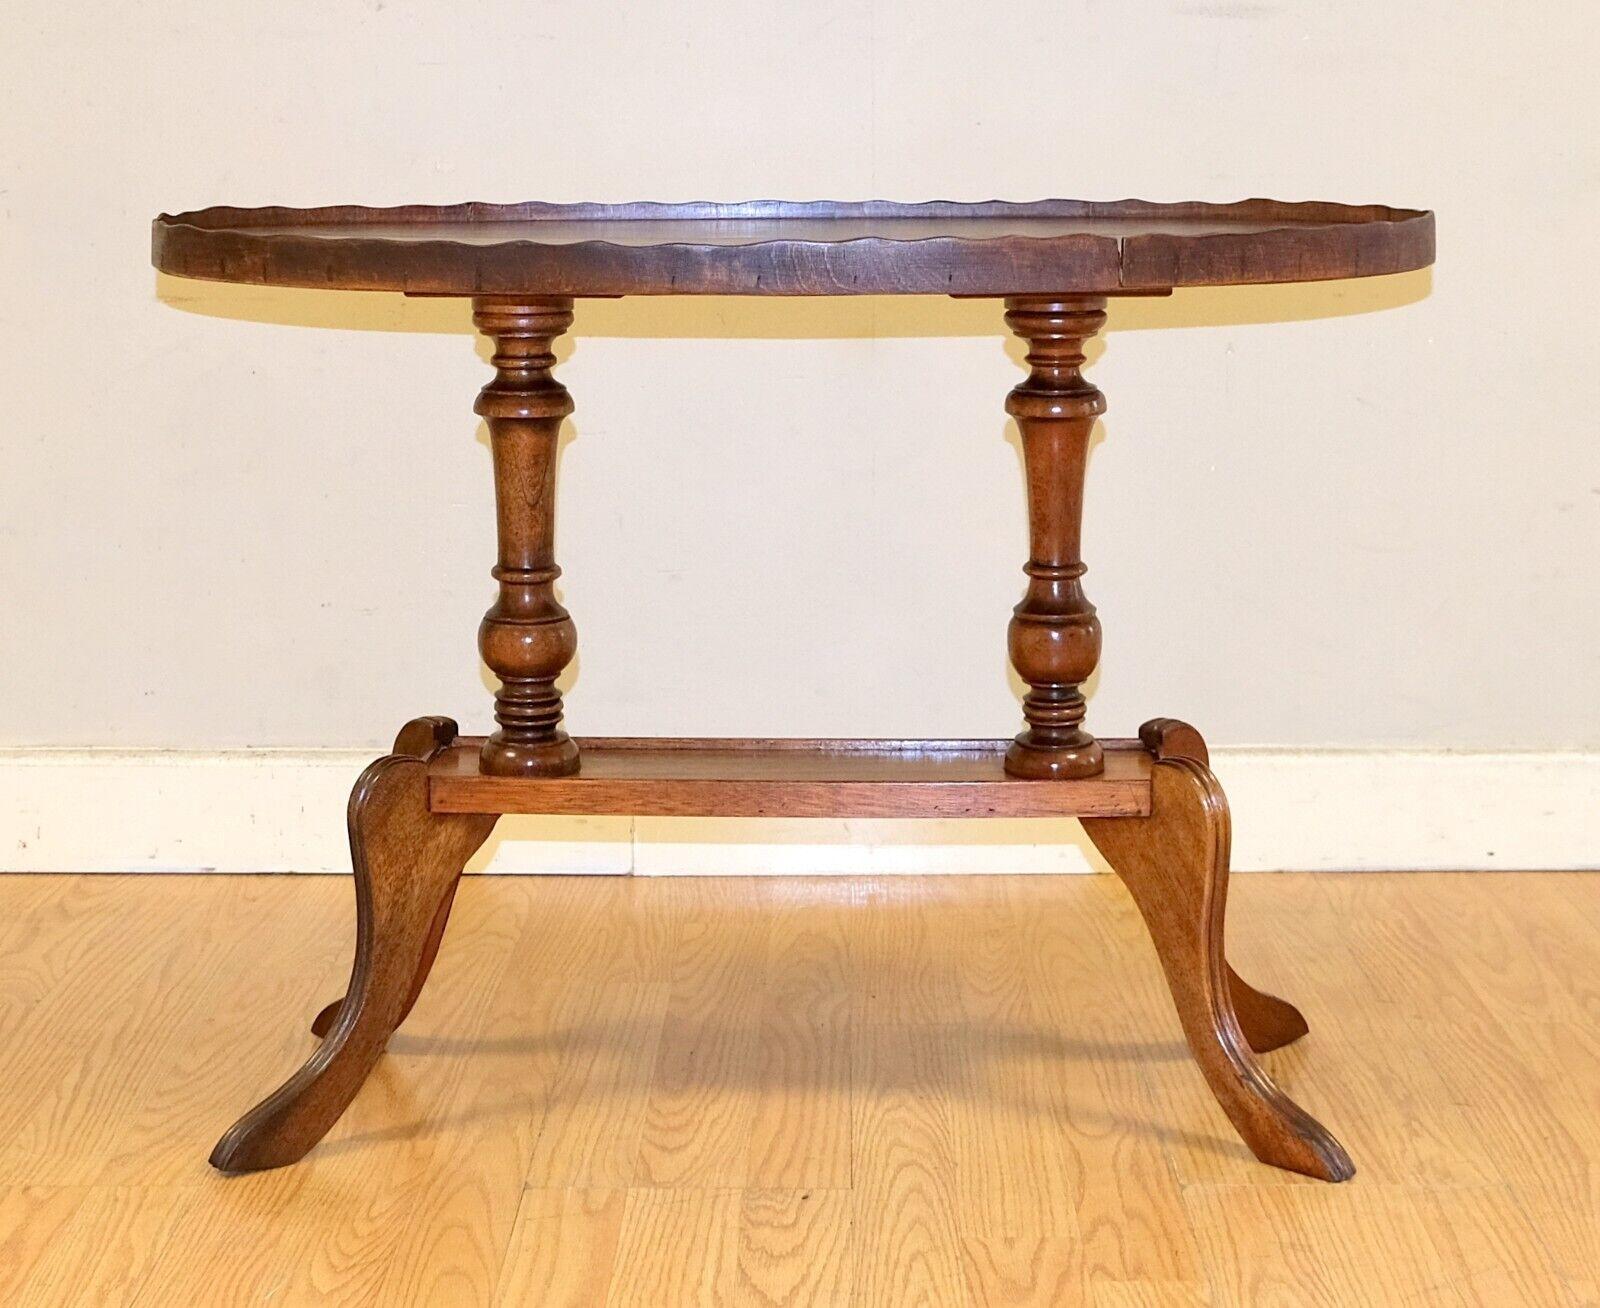 We are delighted to offer for sale this lovely Antique Regency Yew oval crust edge pie coffee table on saber legs. 

A good looking and attractive coffee table with a lovely patina that will compliment any room. Classic Regency style with the crust